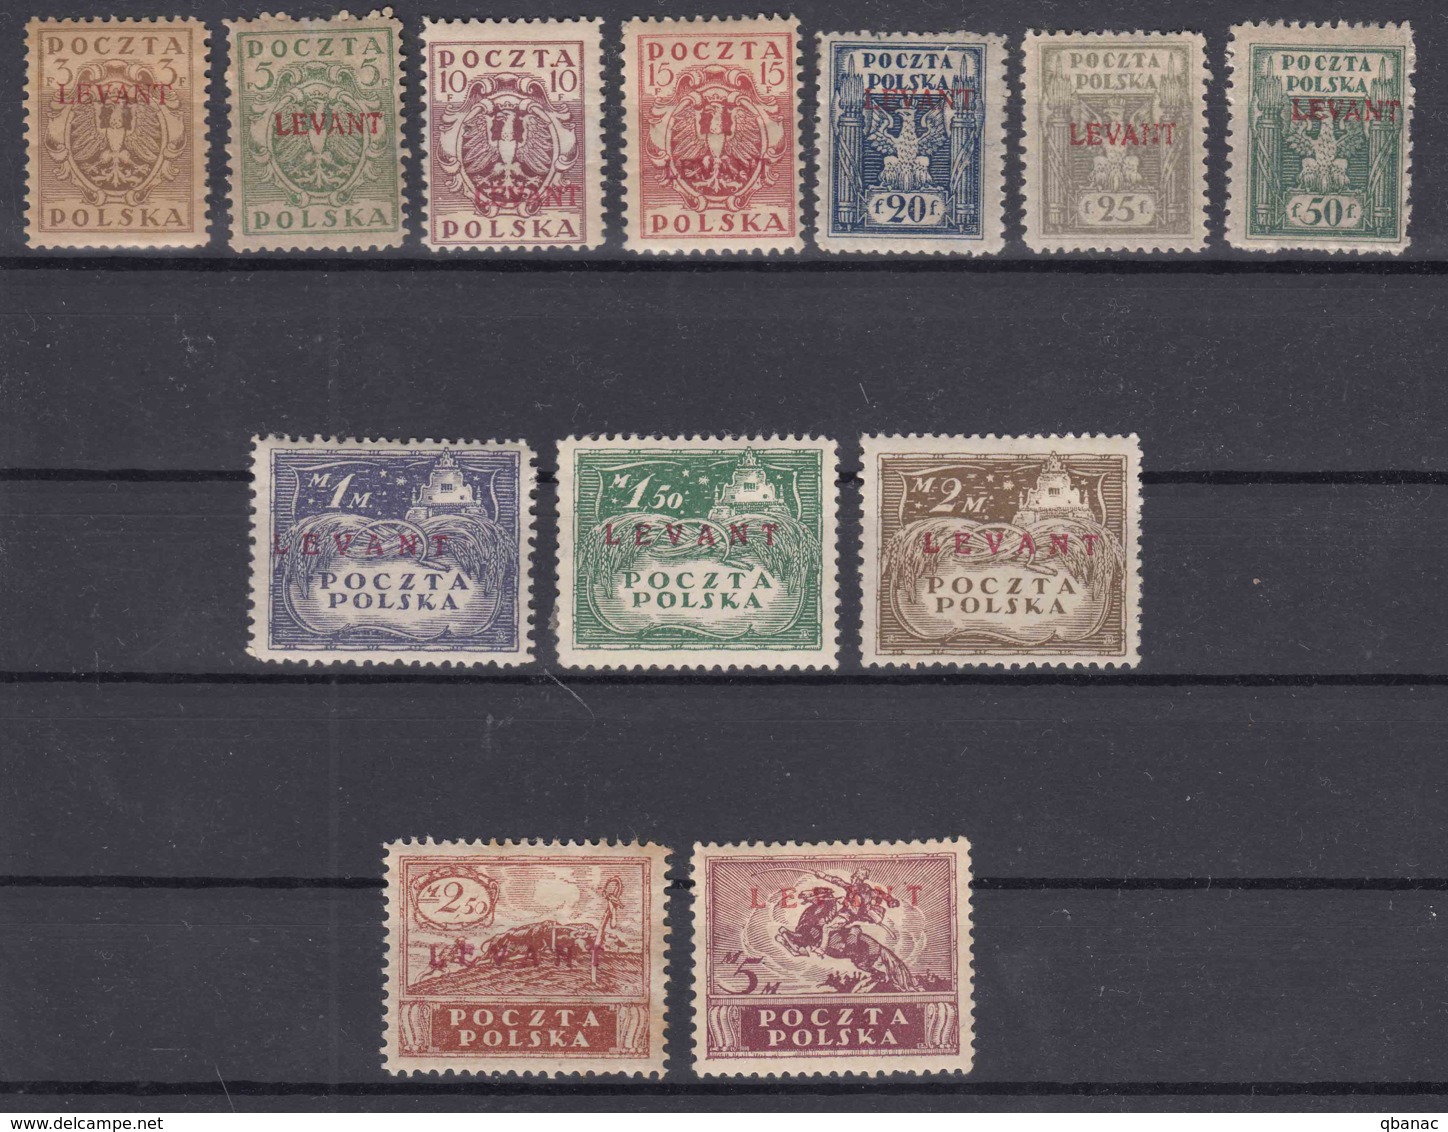 Poland Post Offices In Levant (Turkey) 1919 Mi#1-12 Mint Hinged Complete Set - Levant (Turchia)